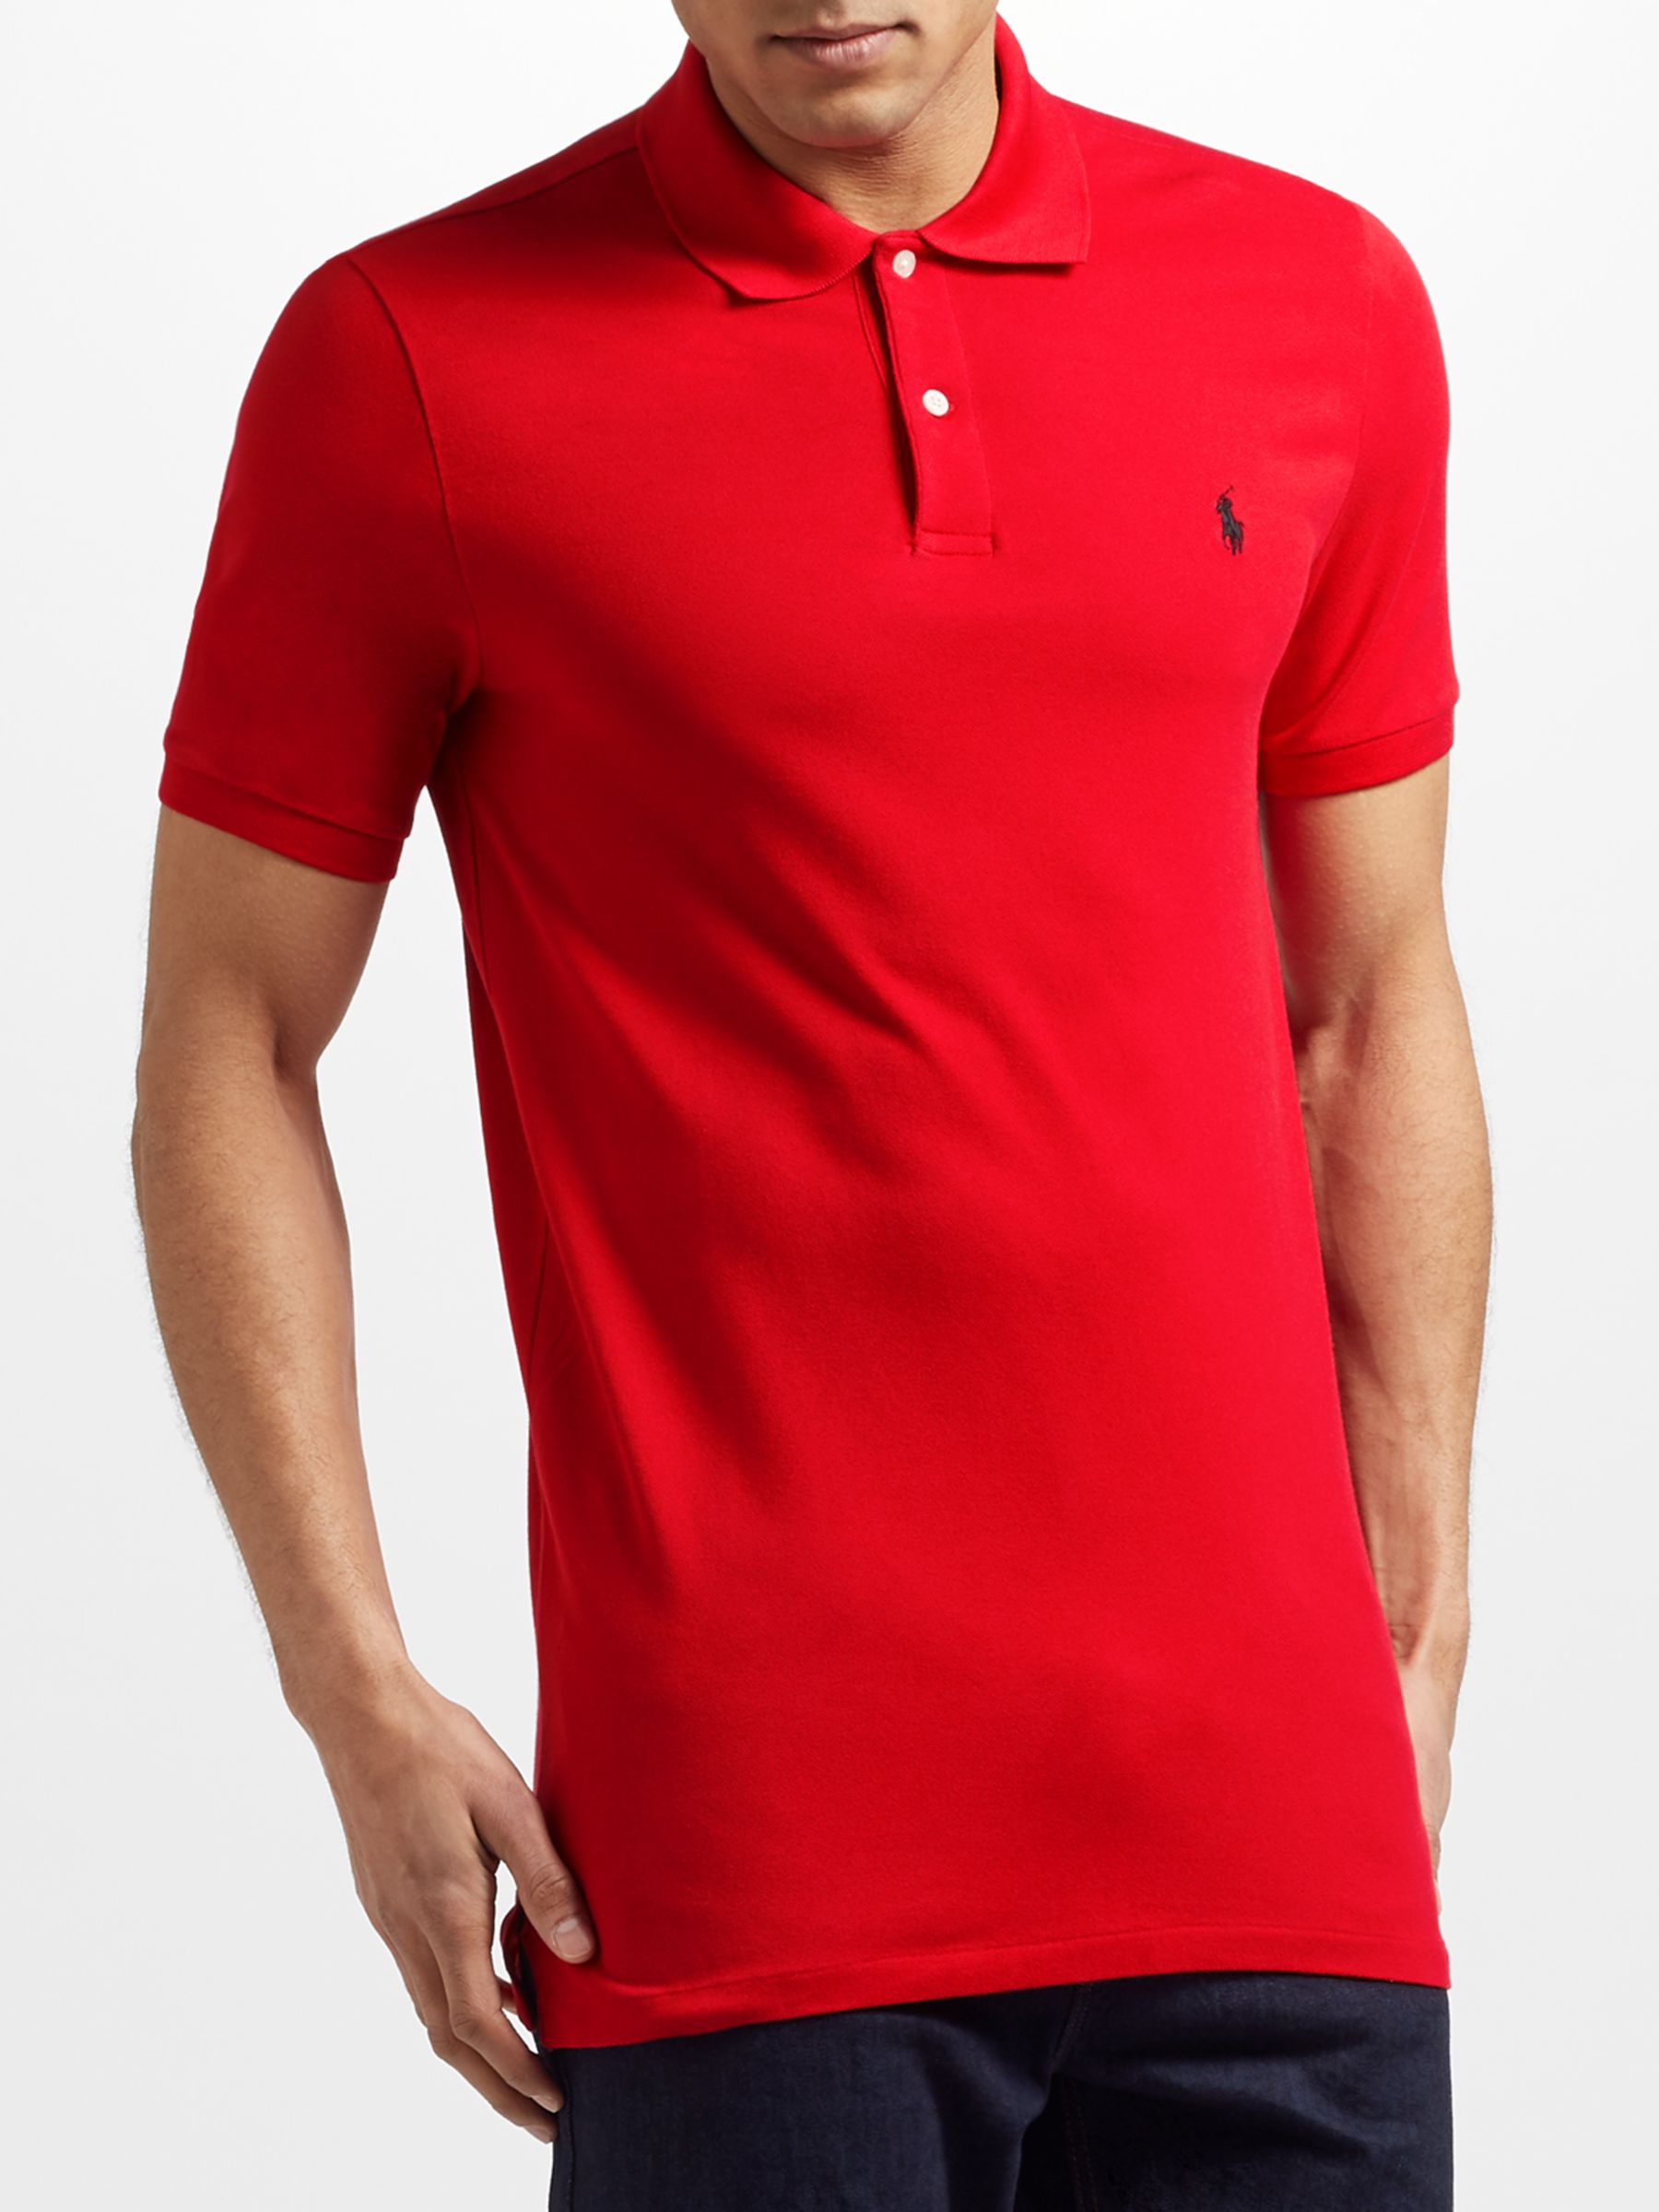 Polo Golf by Ralph Lauren Pro-Fit Polo Shirt, Red